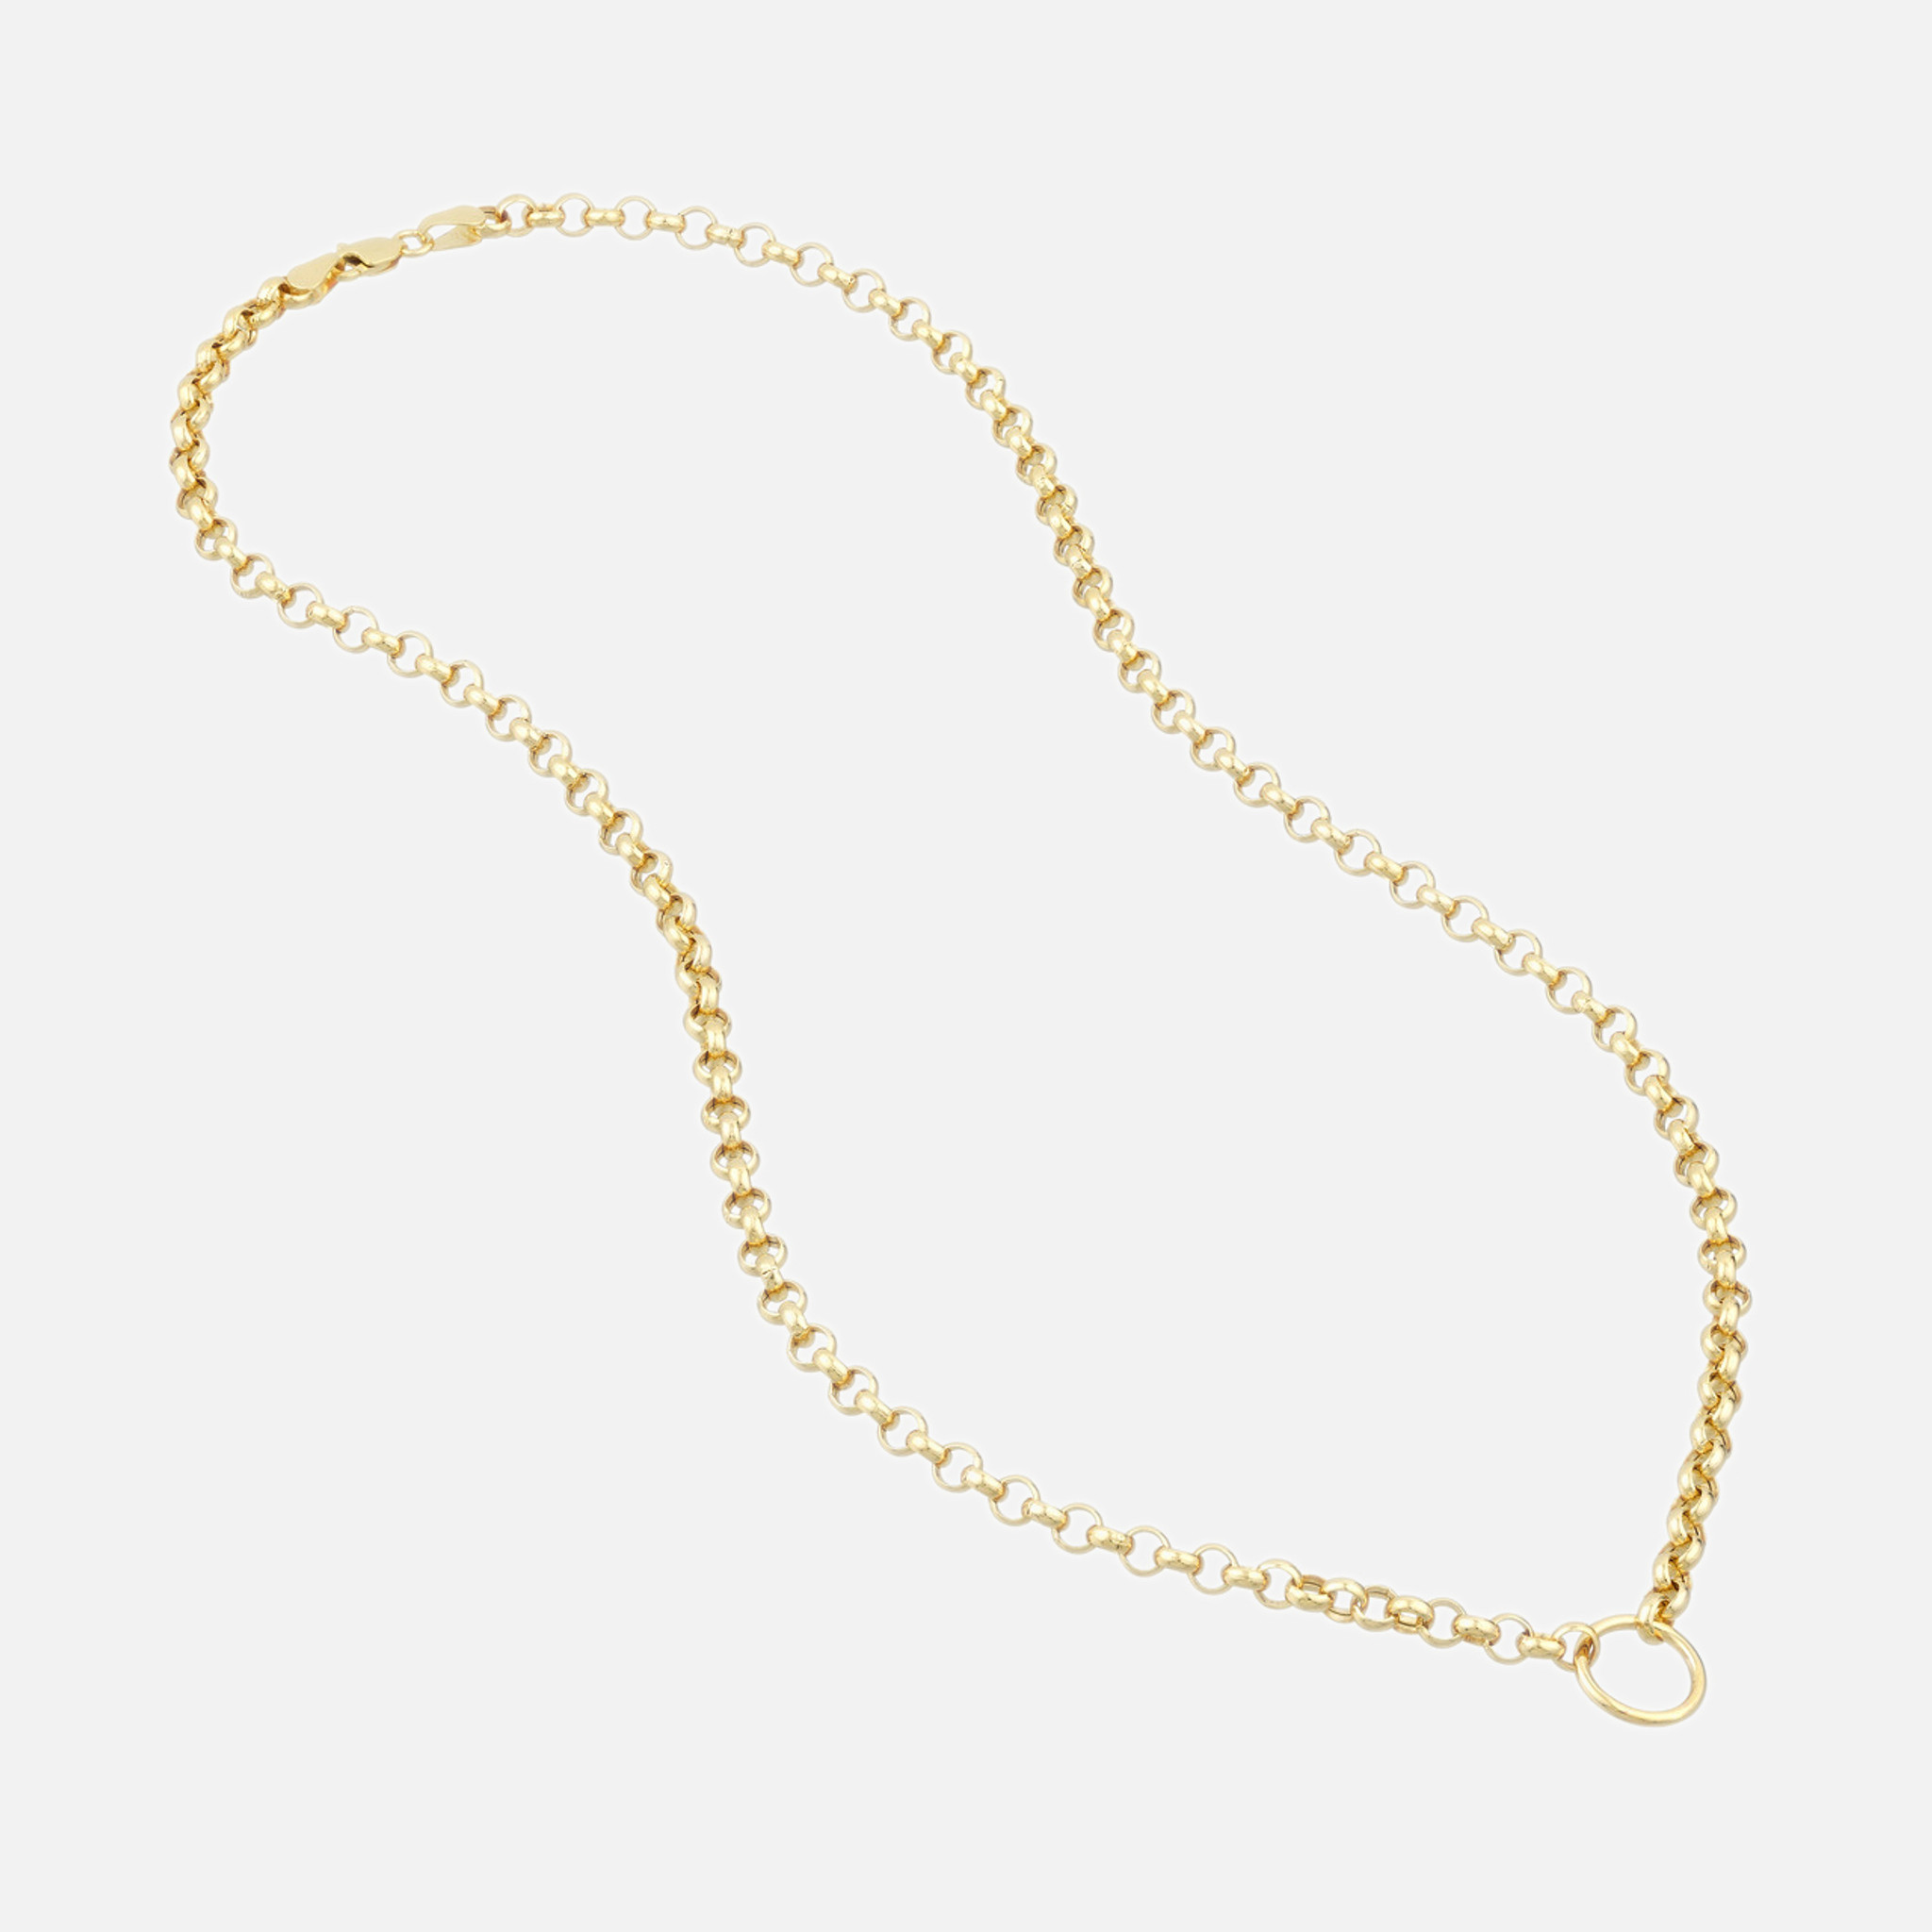 14k yellow gold rolo chain necklace with a mix of elegant hollow rolo chain links.